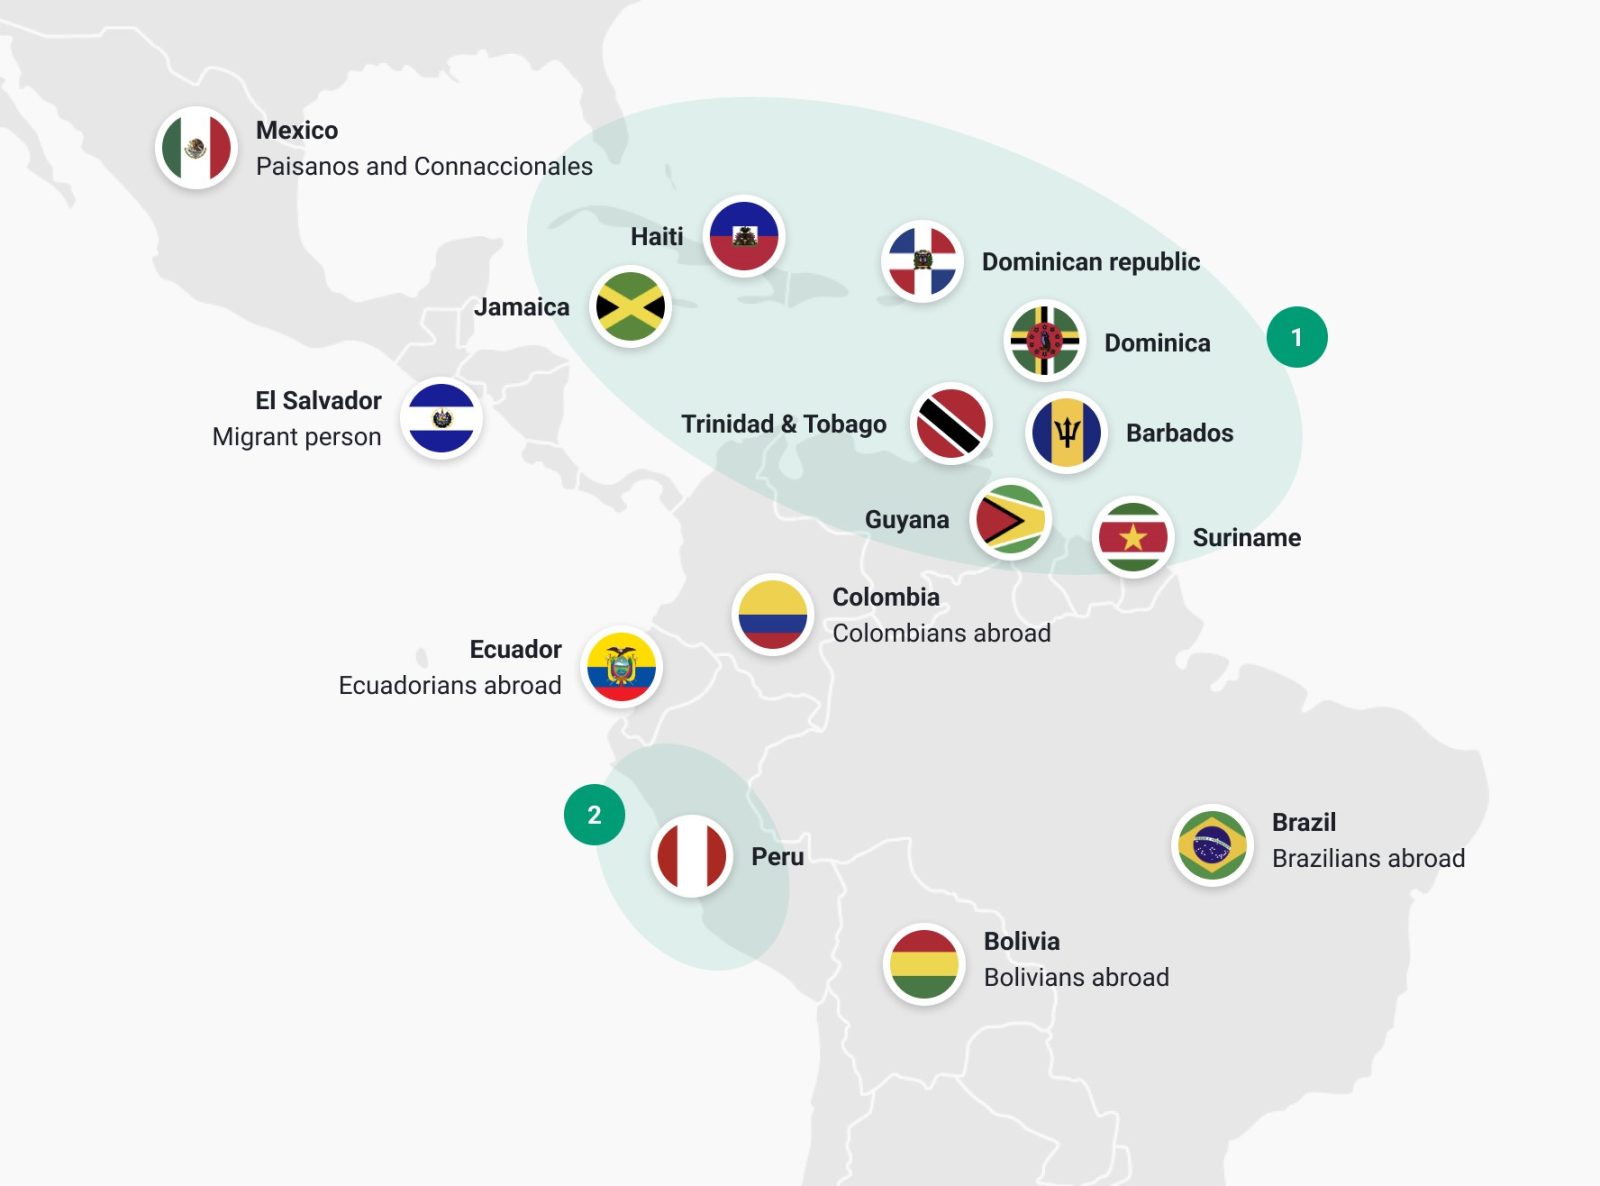 A map of Latin America and the Caribbean showing the countries which use the word "diaspora" (the Caribbean islands, Guyana, Suriname and Peru) and those which use "nationals abroad" (Mexico, El Salvador, Ecuador, Colombia, Brazil and Bolivia).